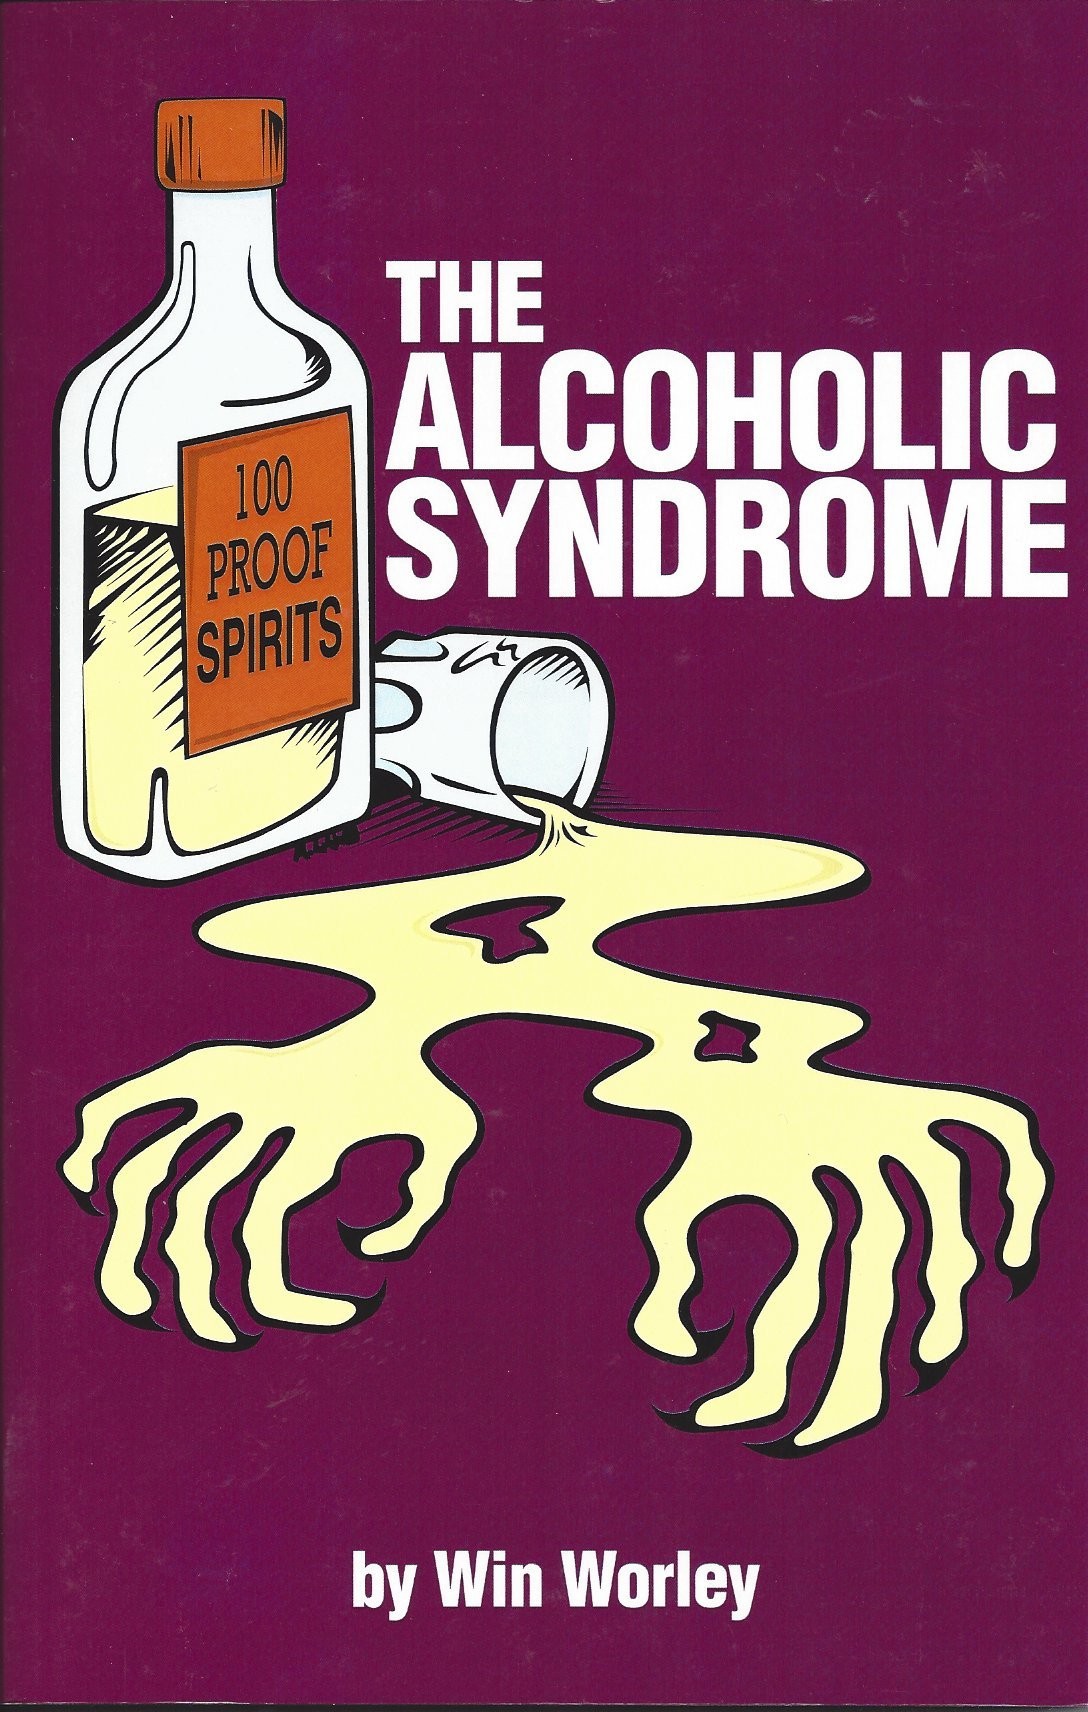 The Alcoholic Syndrome